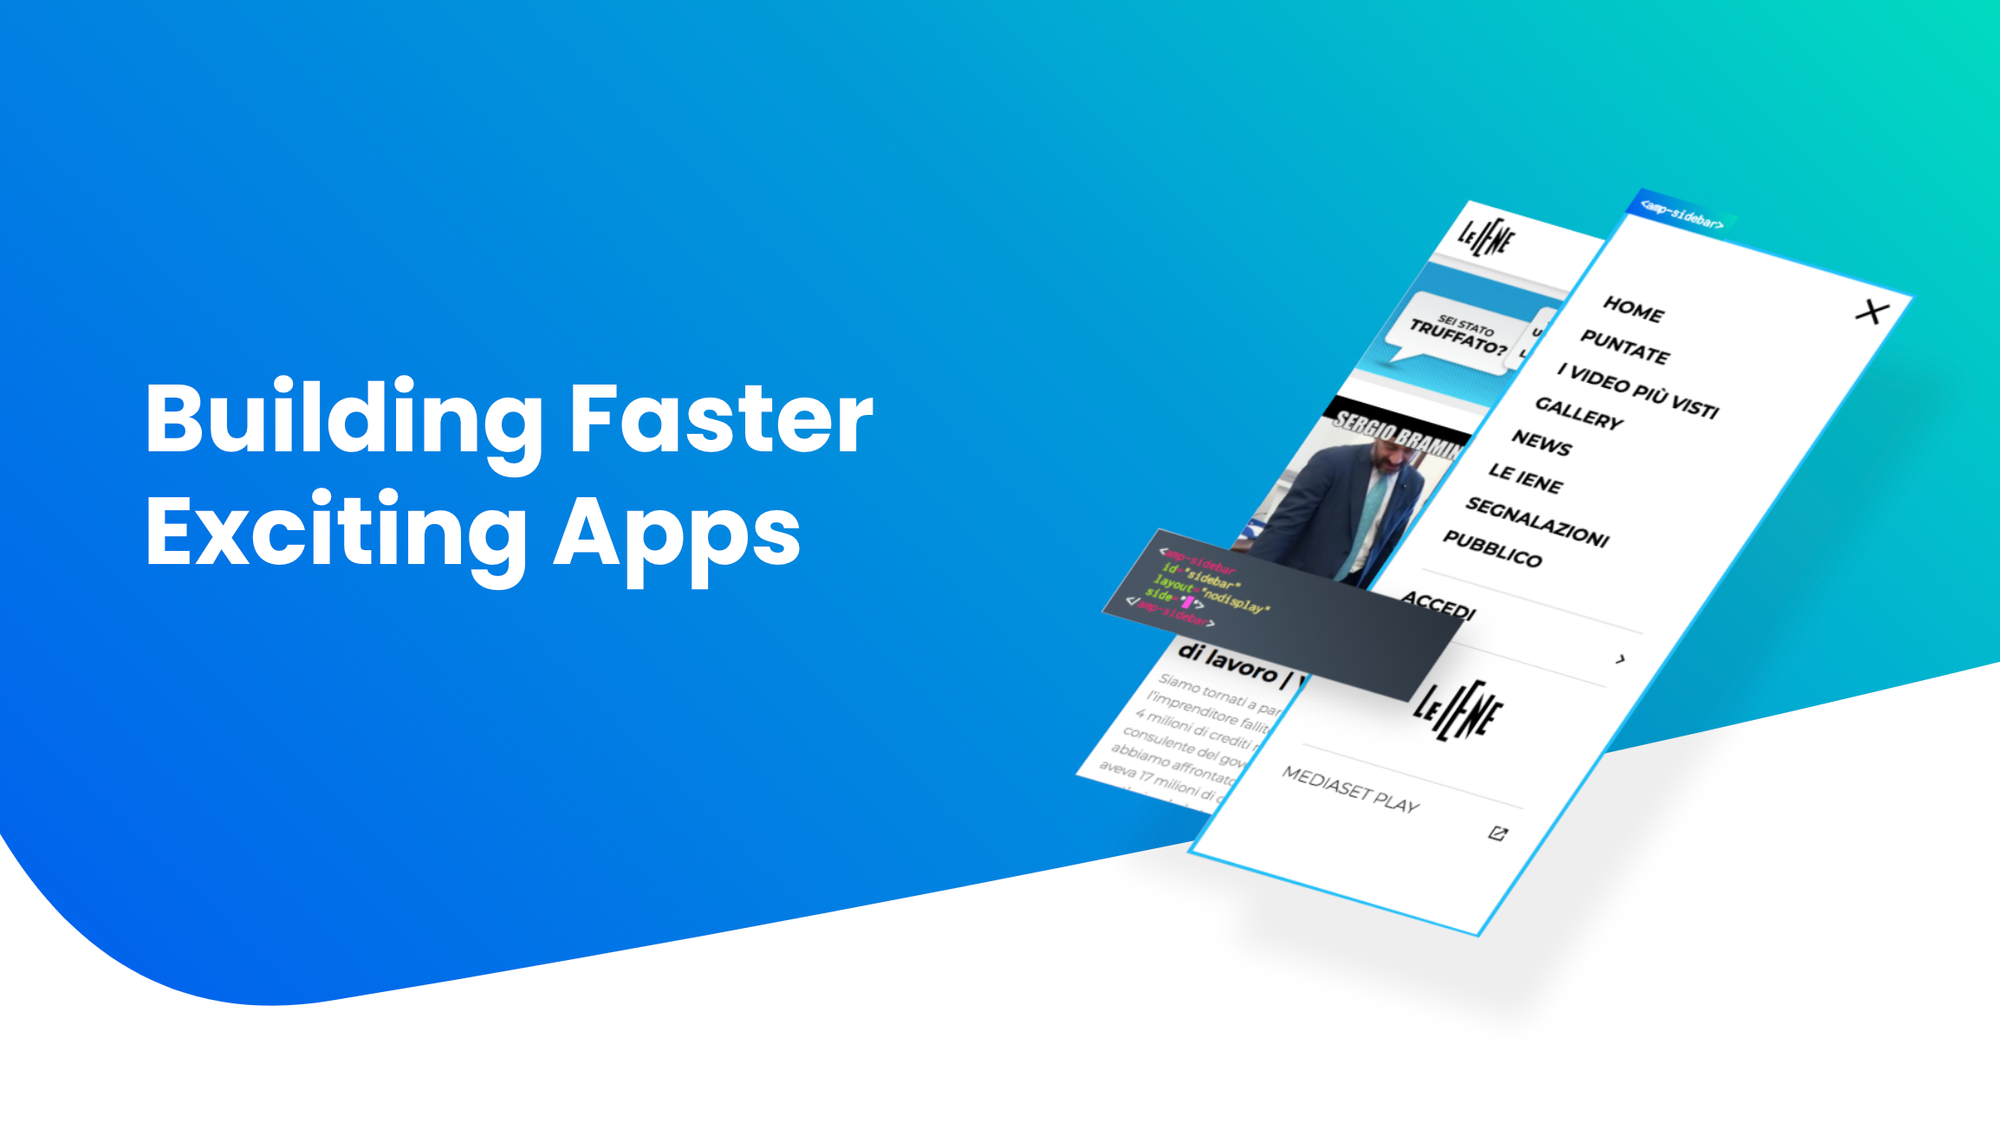 Building Faster Exciting Apps